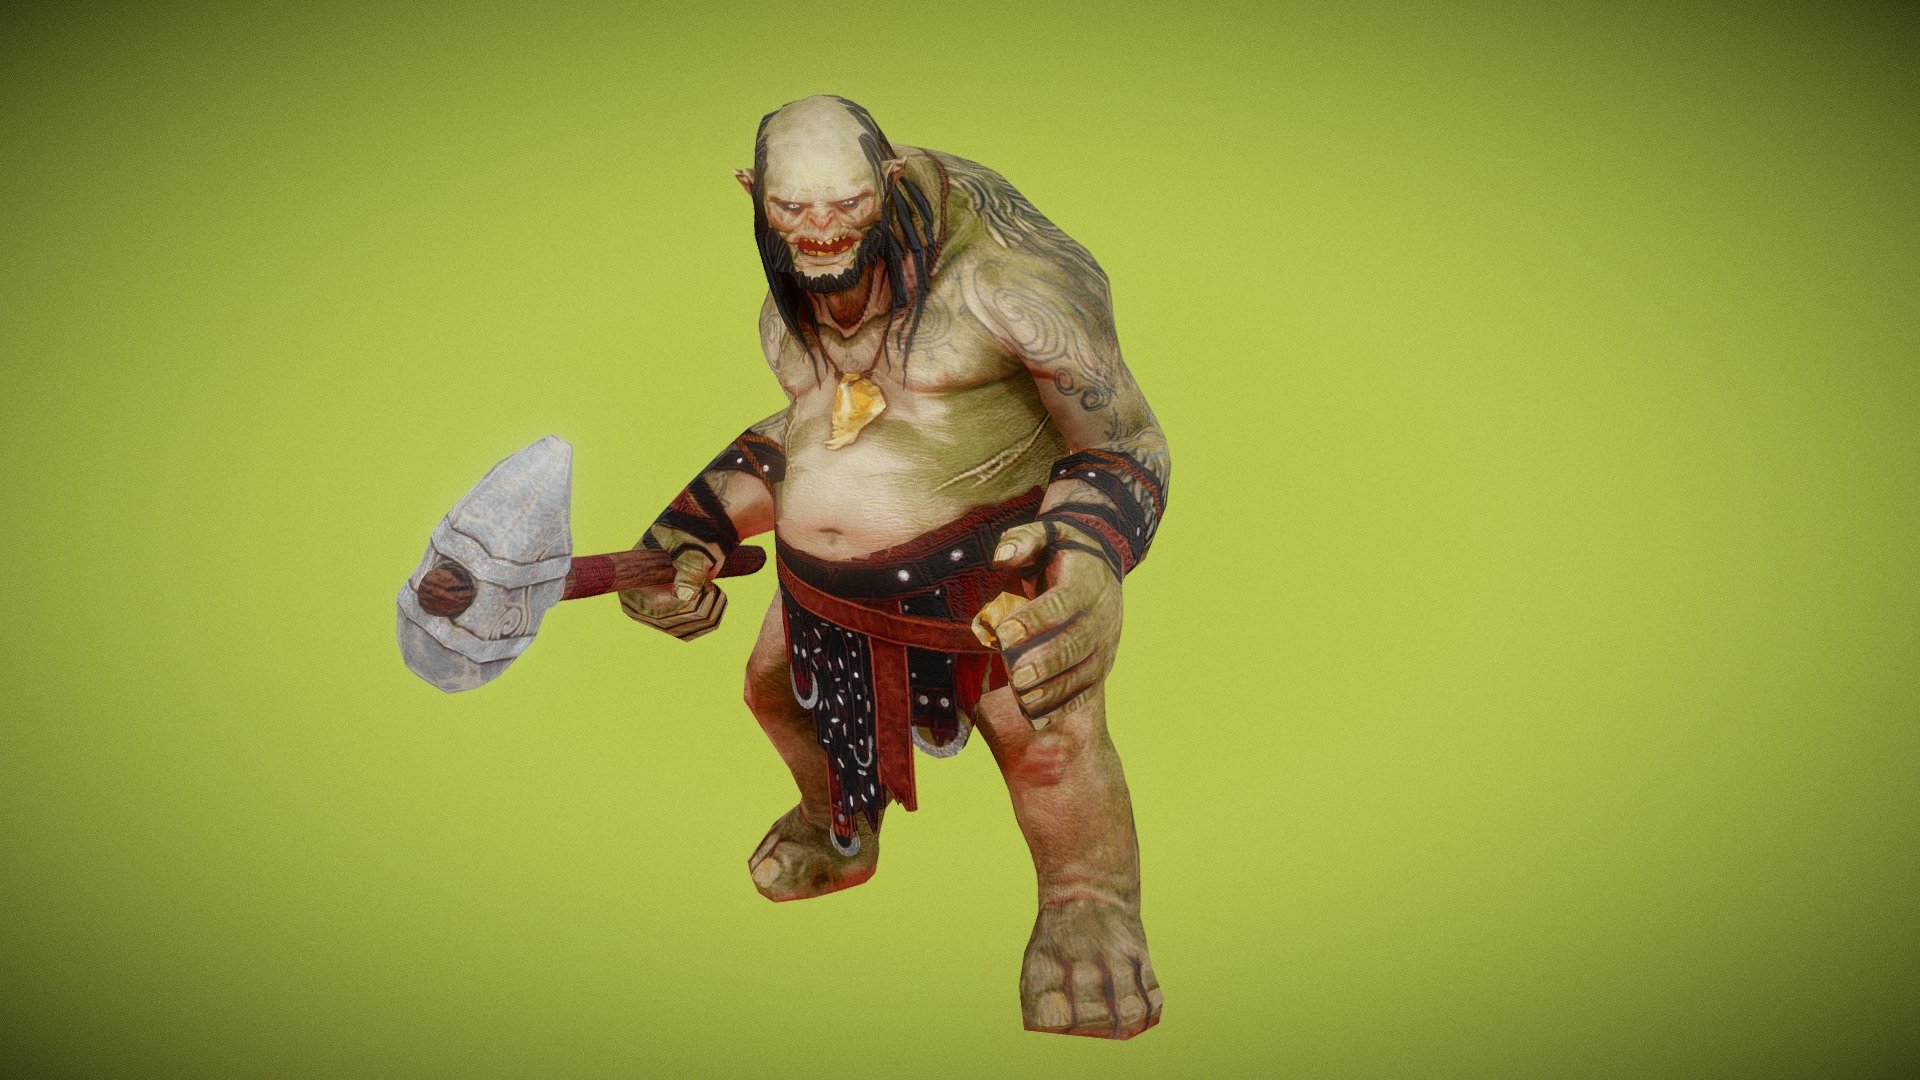 Lowpoly model of Cave troll,game ready,rigged, Design inspired by warceaft &amp; Lord of the Rings universes. PBR textures. Include weapons and nude mesh. Ready to import into various game engine like UE4 and Unity. Include nude meshes This character would work well as an NPC, a rank-and-file enemy, or a boss for a fantasy game. This character is of different proportions than the standard Epic Skeleton. The visualization of this character was done in Blender, Substance Painter. The rendering result in other versions with different settings may vary.

+animations unique animations: Idle, Light attack, Critical attack,Death,scary scream,victory.

+Total poly count for each body version (include weapons)

+Rigging use FBX skin. Full body rig and basic facial rig.

+PBR textures (Metallic-Roughness) . DirectX Normal Maps. .PNG format.

Let me know if you have any questions, I’ll be glad to help! - Cave Troll skin 4 - Buy Royalty Free 3D model by Luna Studio (@StudioLuna) 3d model